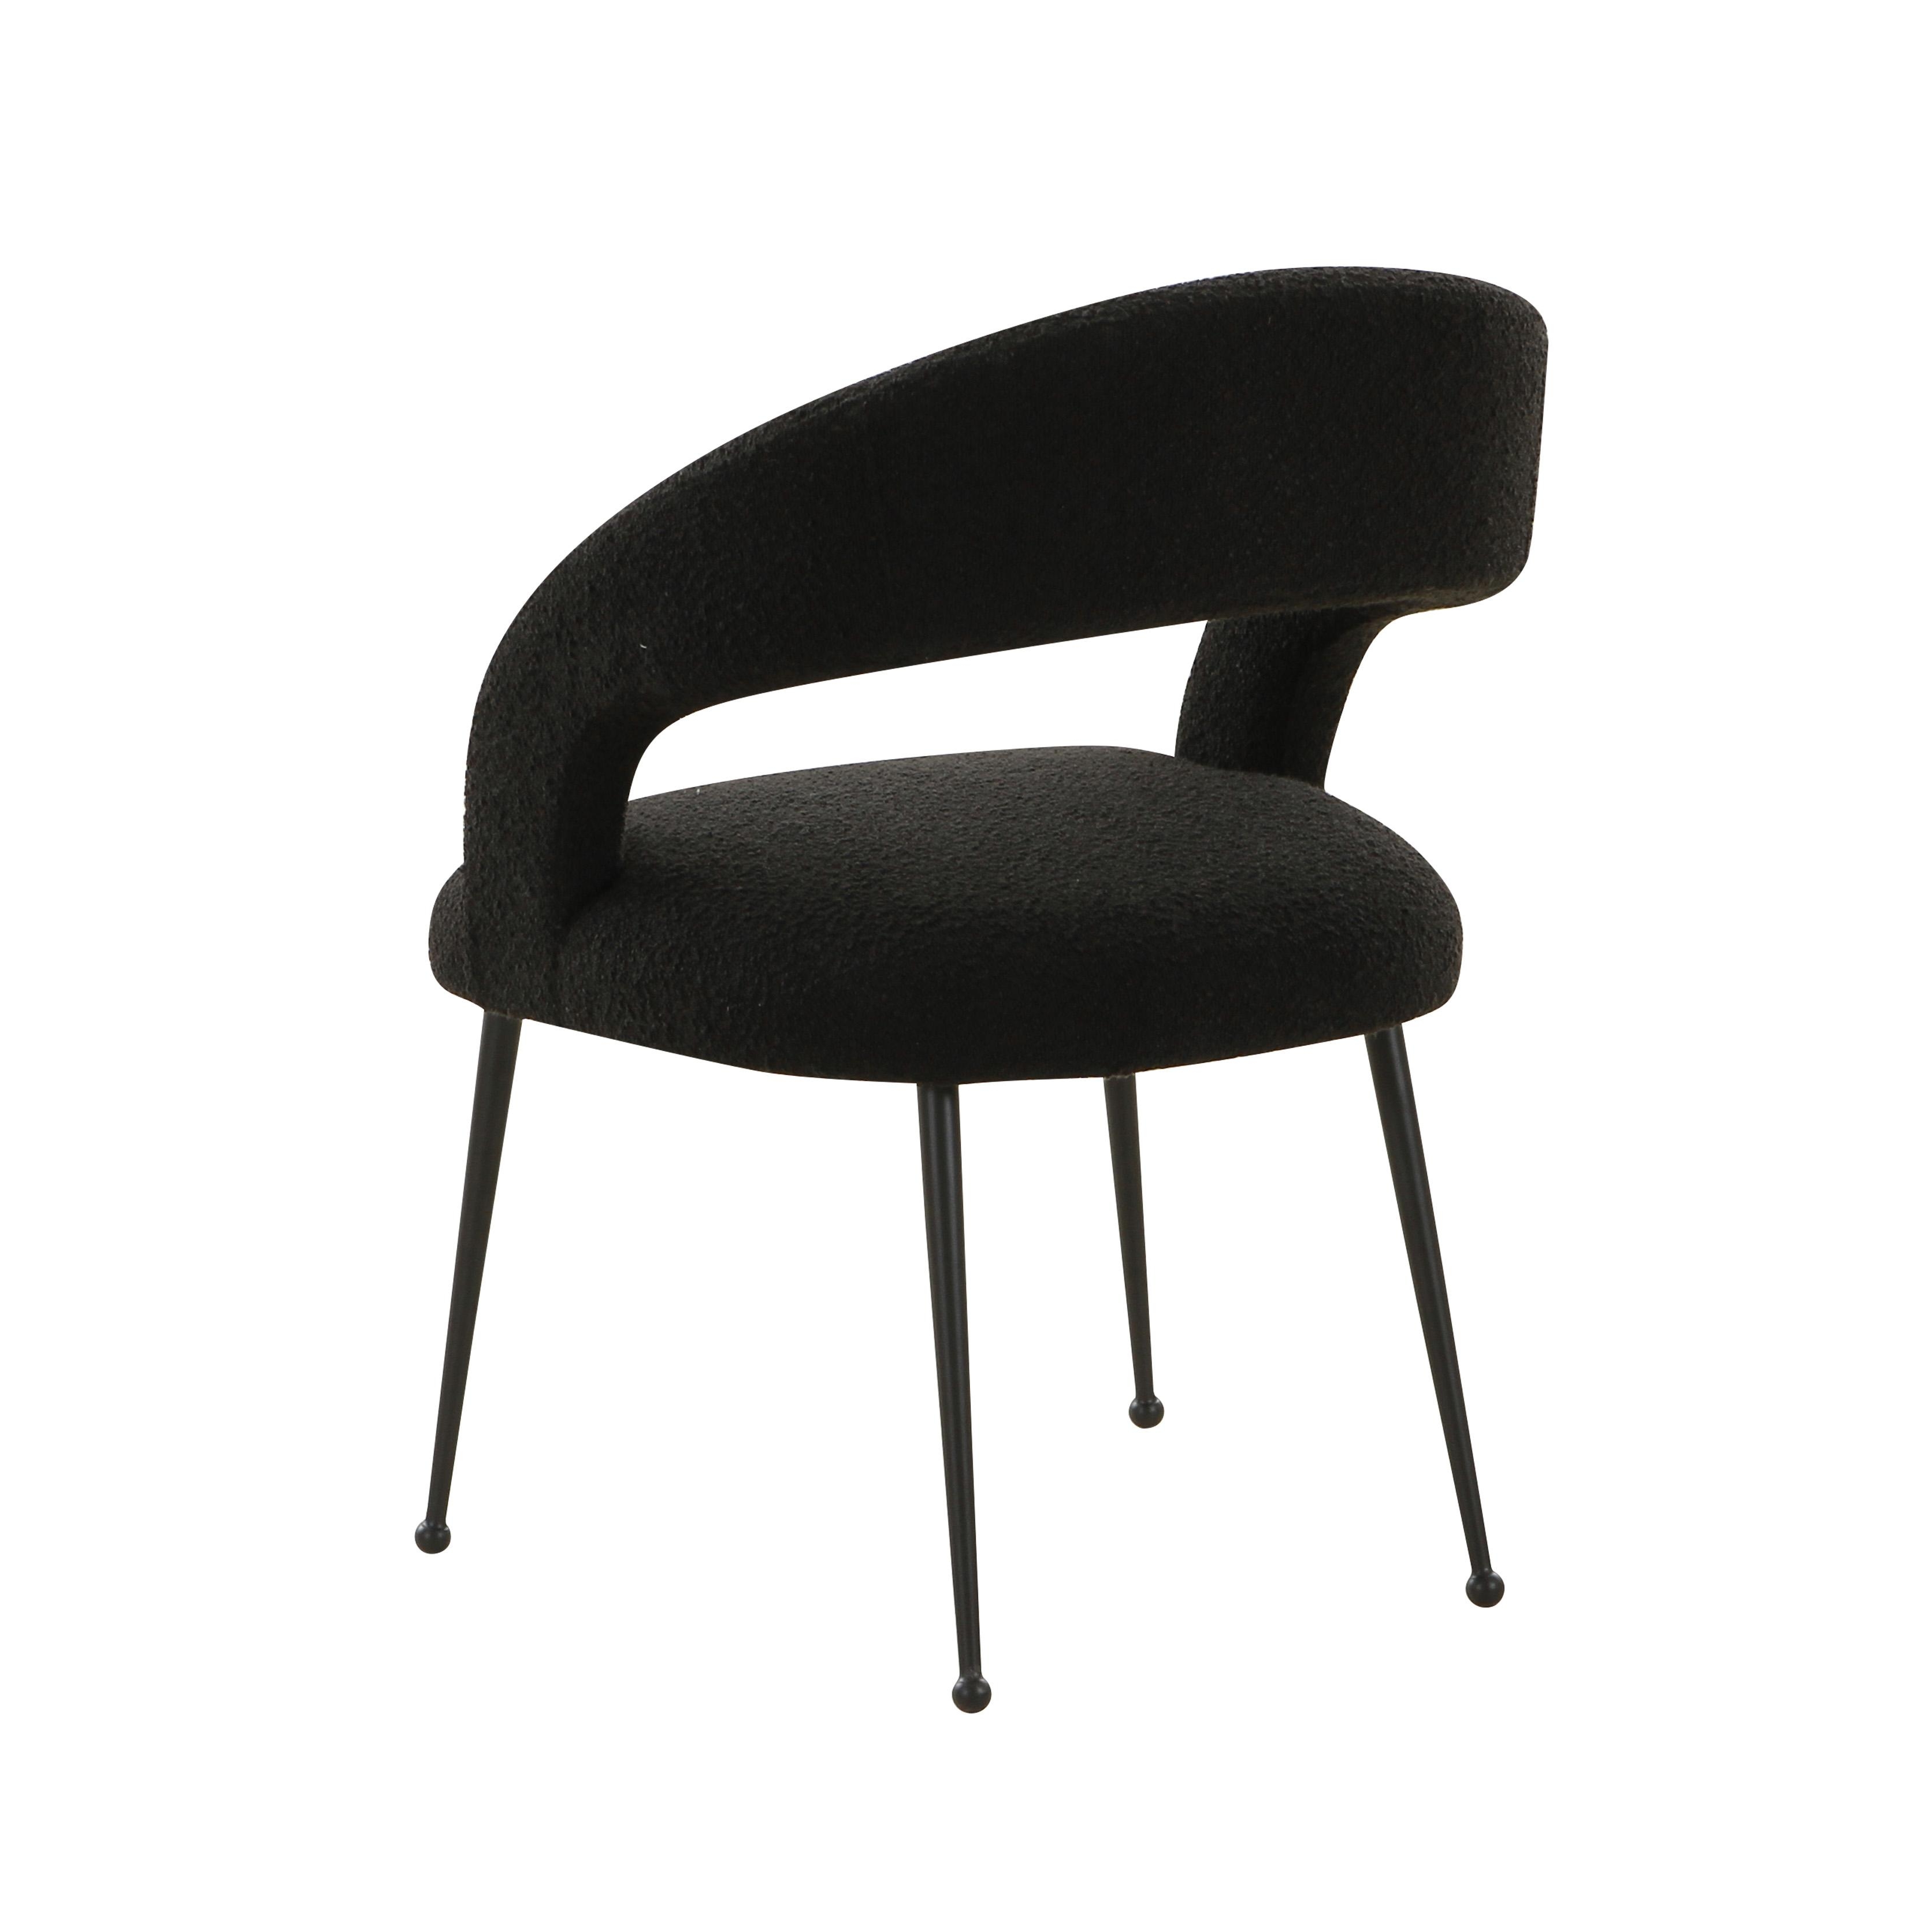 Rocco Black Boucle Dining Chair - Image 2